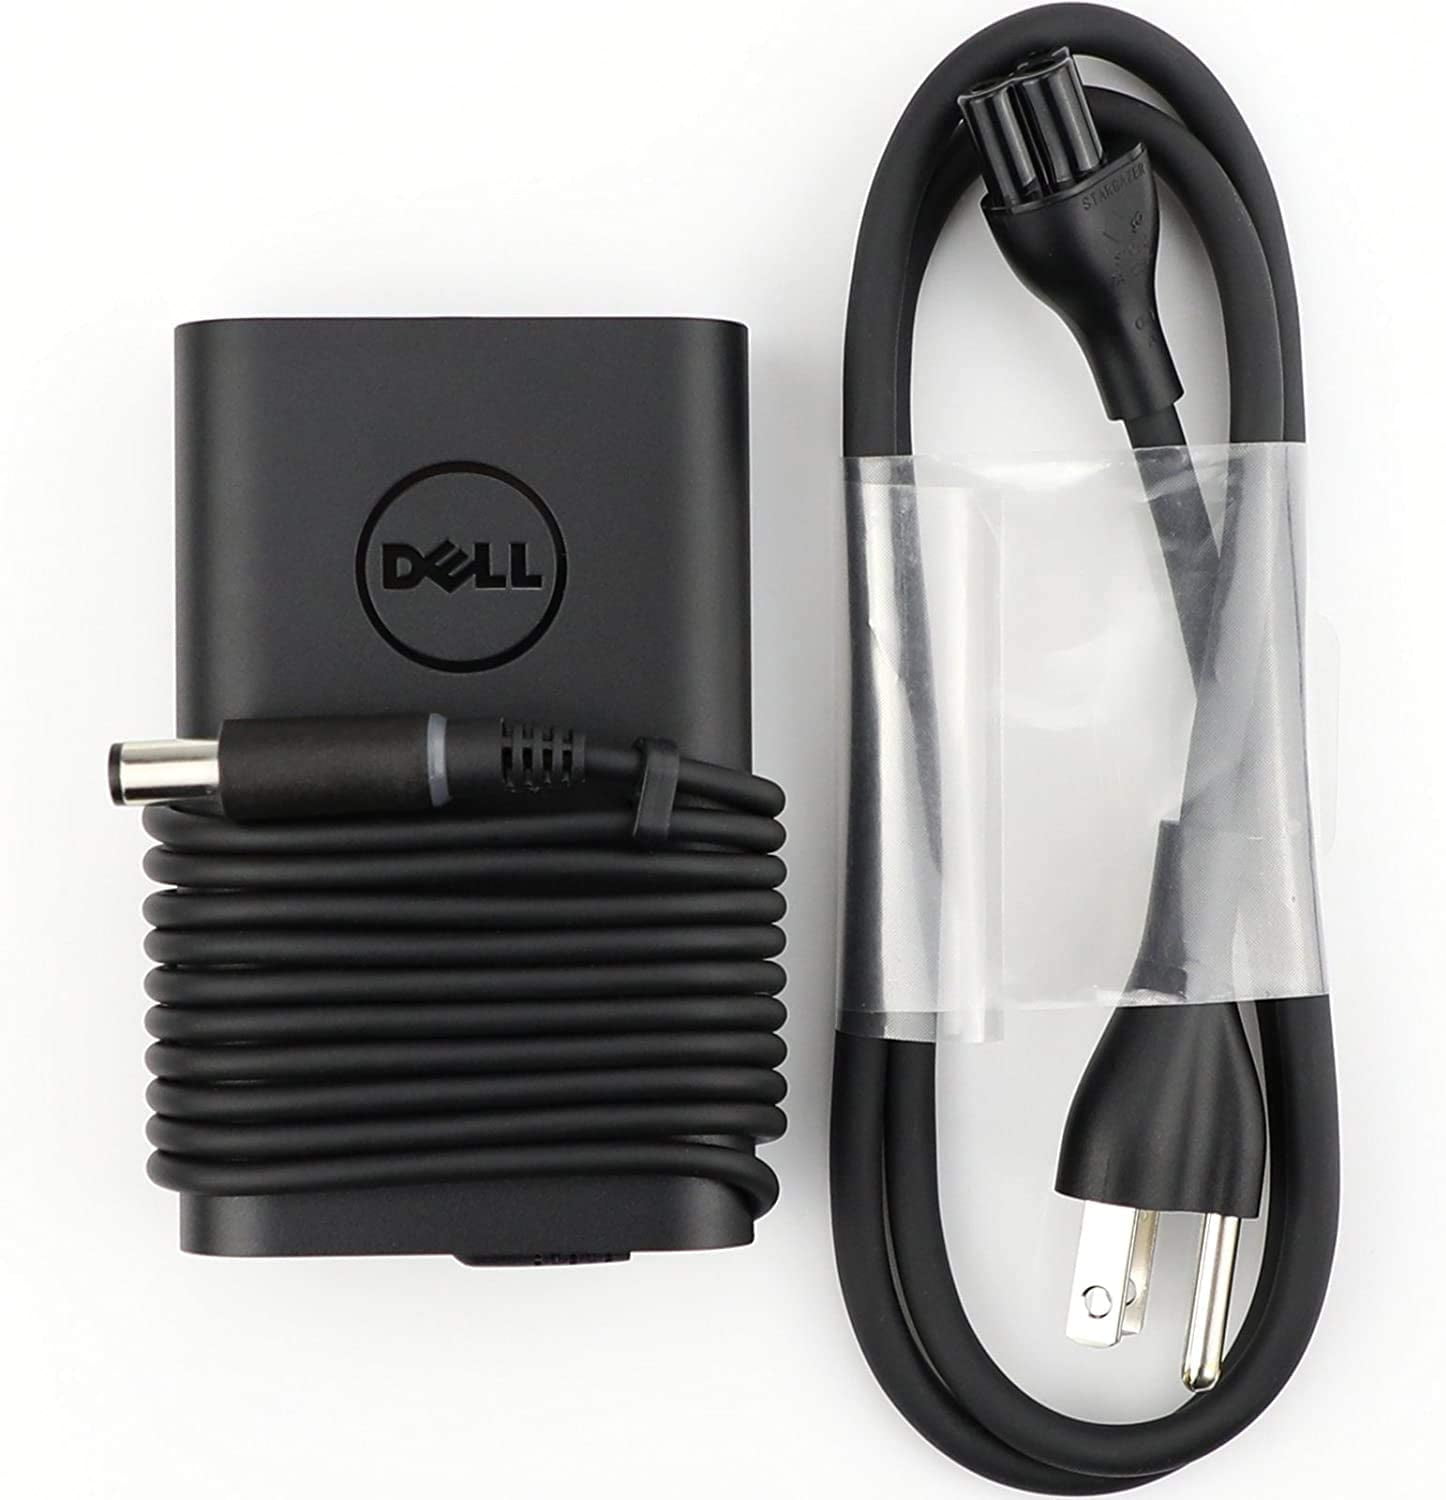 New Genuine Dell Inspiron 3135 3420 3441 3442 Power Charger Adapter 